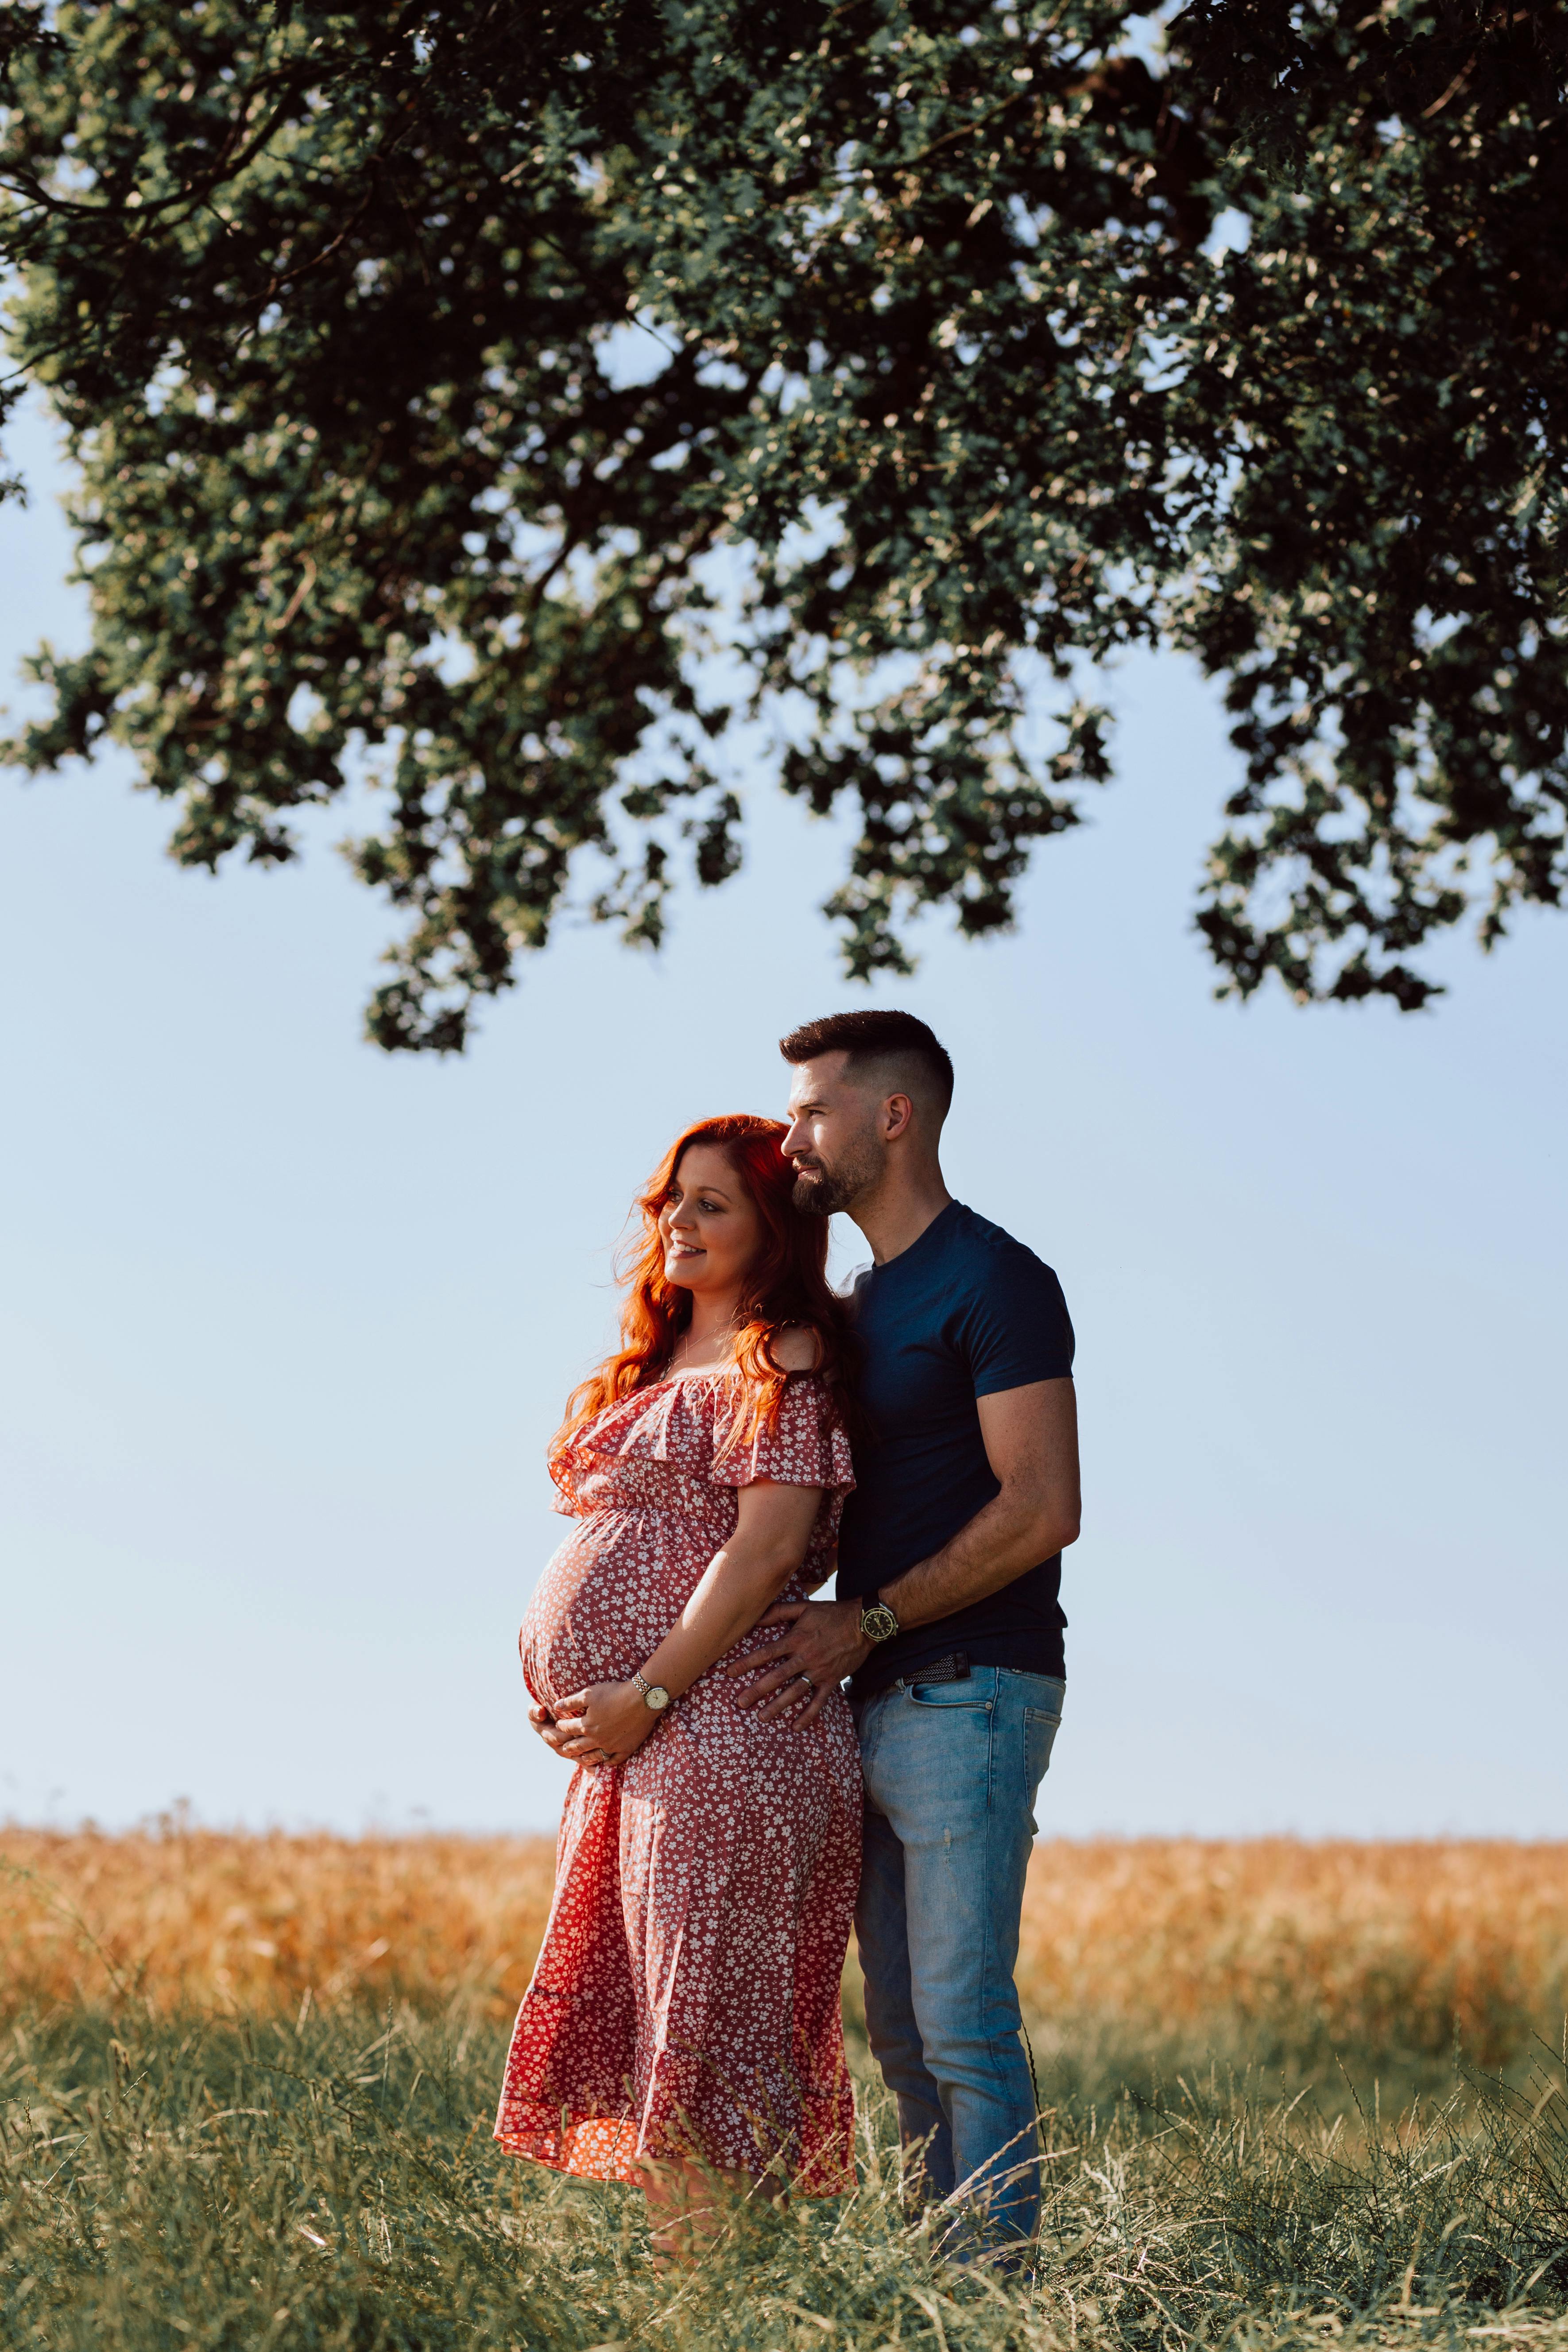 A pregnant woman standing with her husband | Source: Pexels